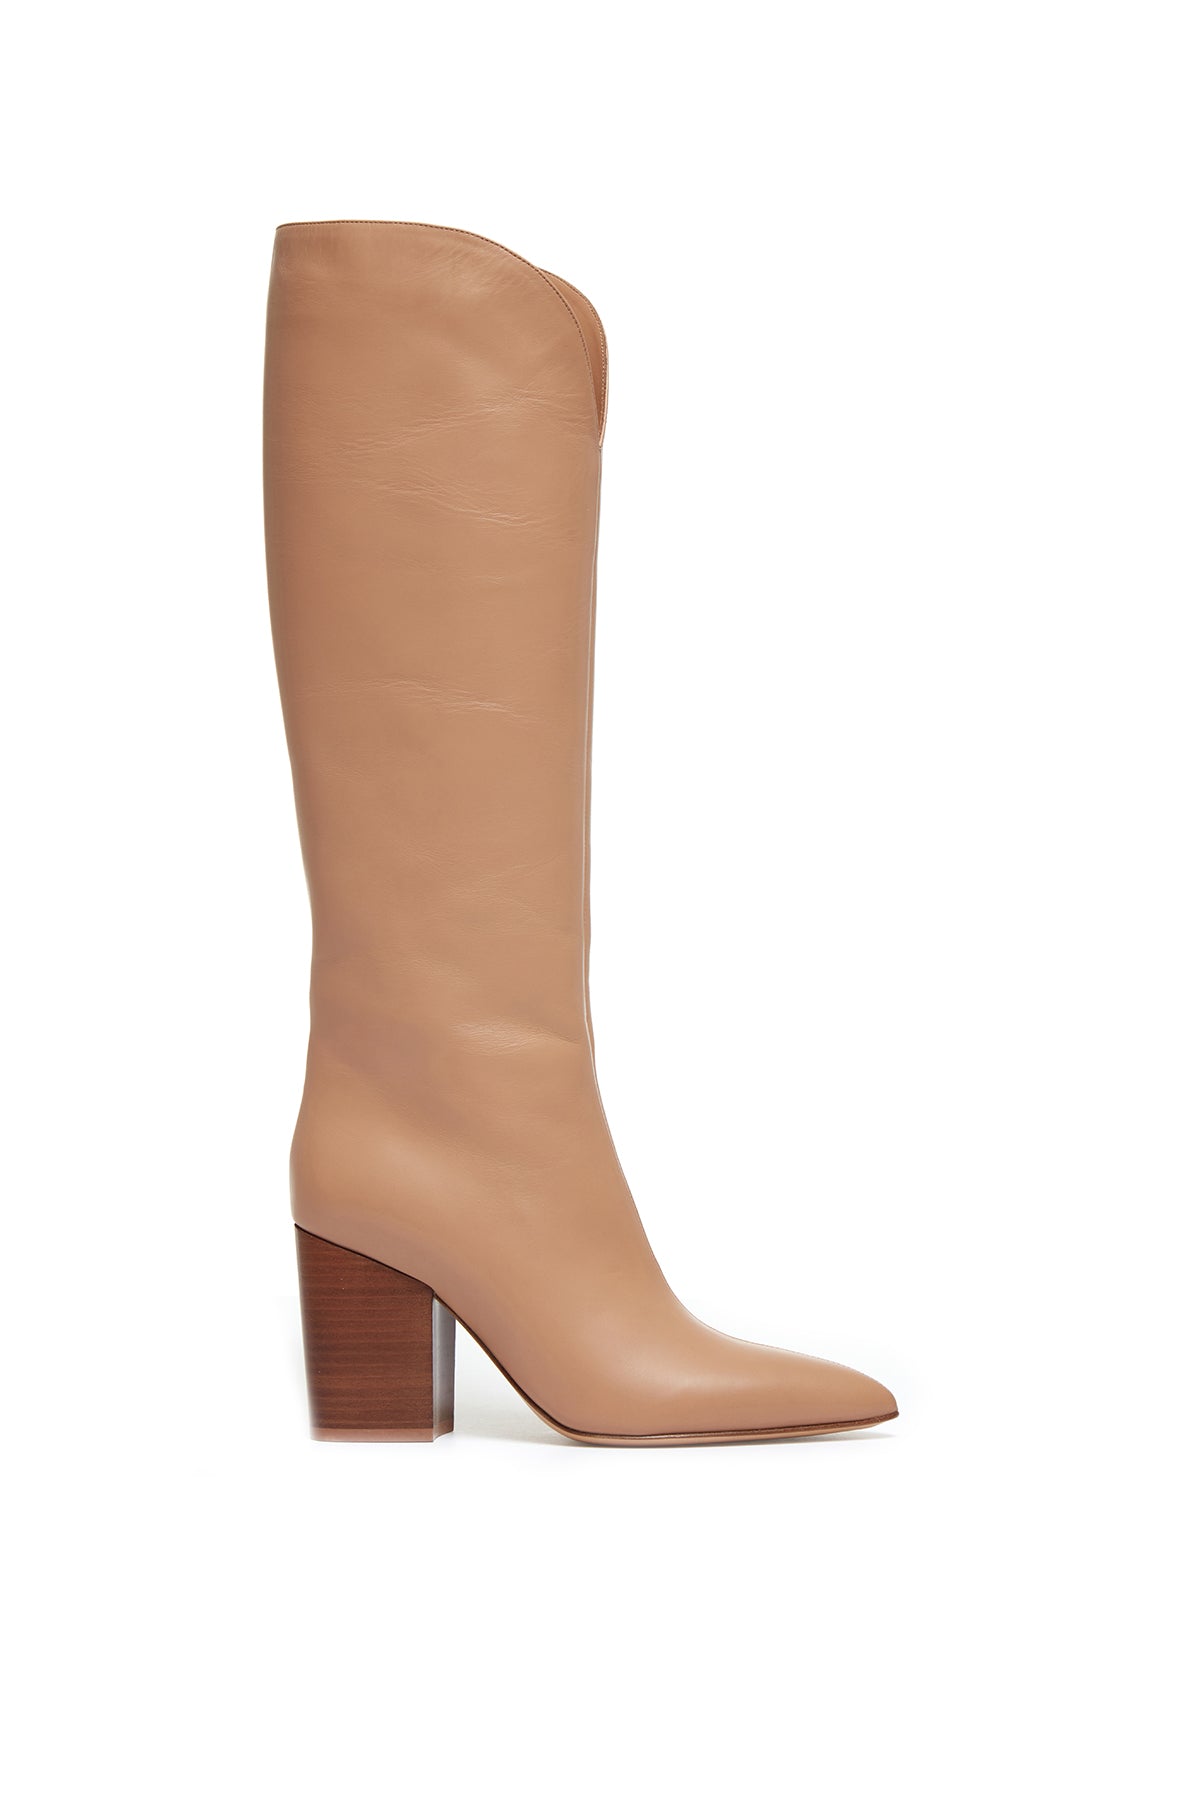 Cora Knee High Boot in Camel Leather